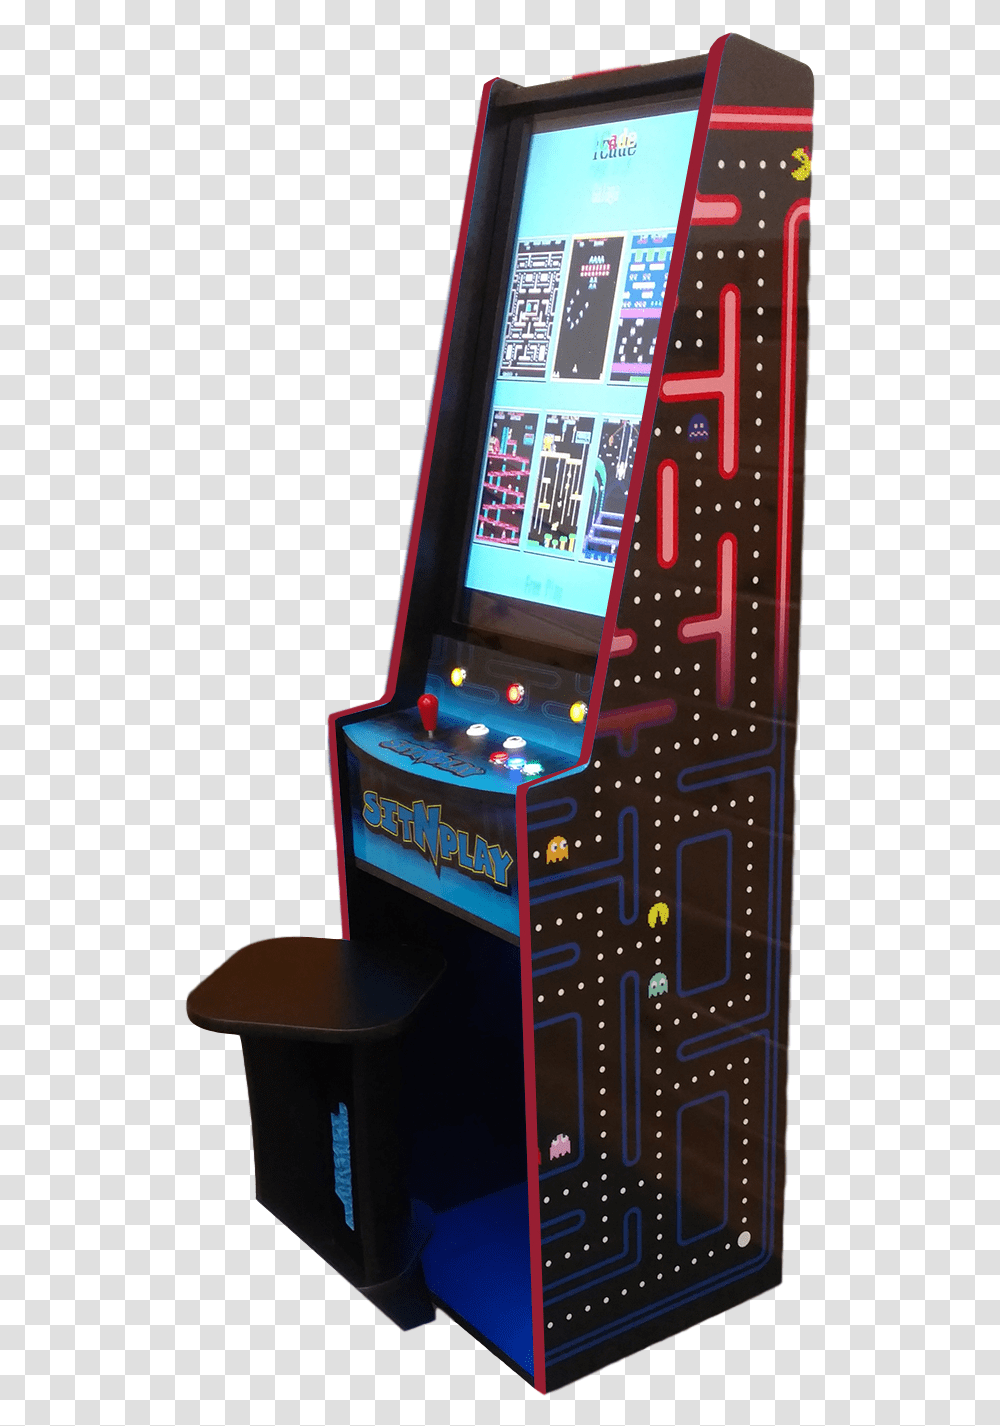 Arcade Game Slim Upright Multicade Arcade Cabinet, Mobile Phone, Electronics, Cell Phone, Arcade Game Machine Transparent Png